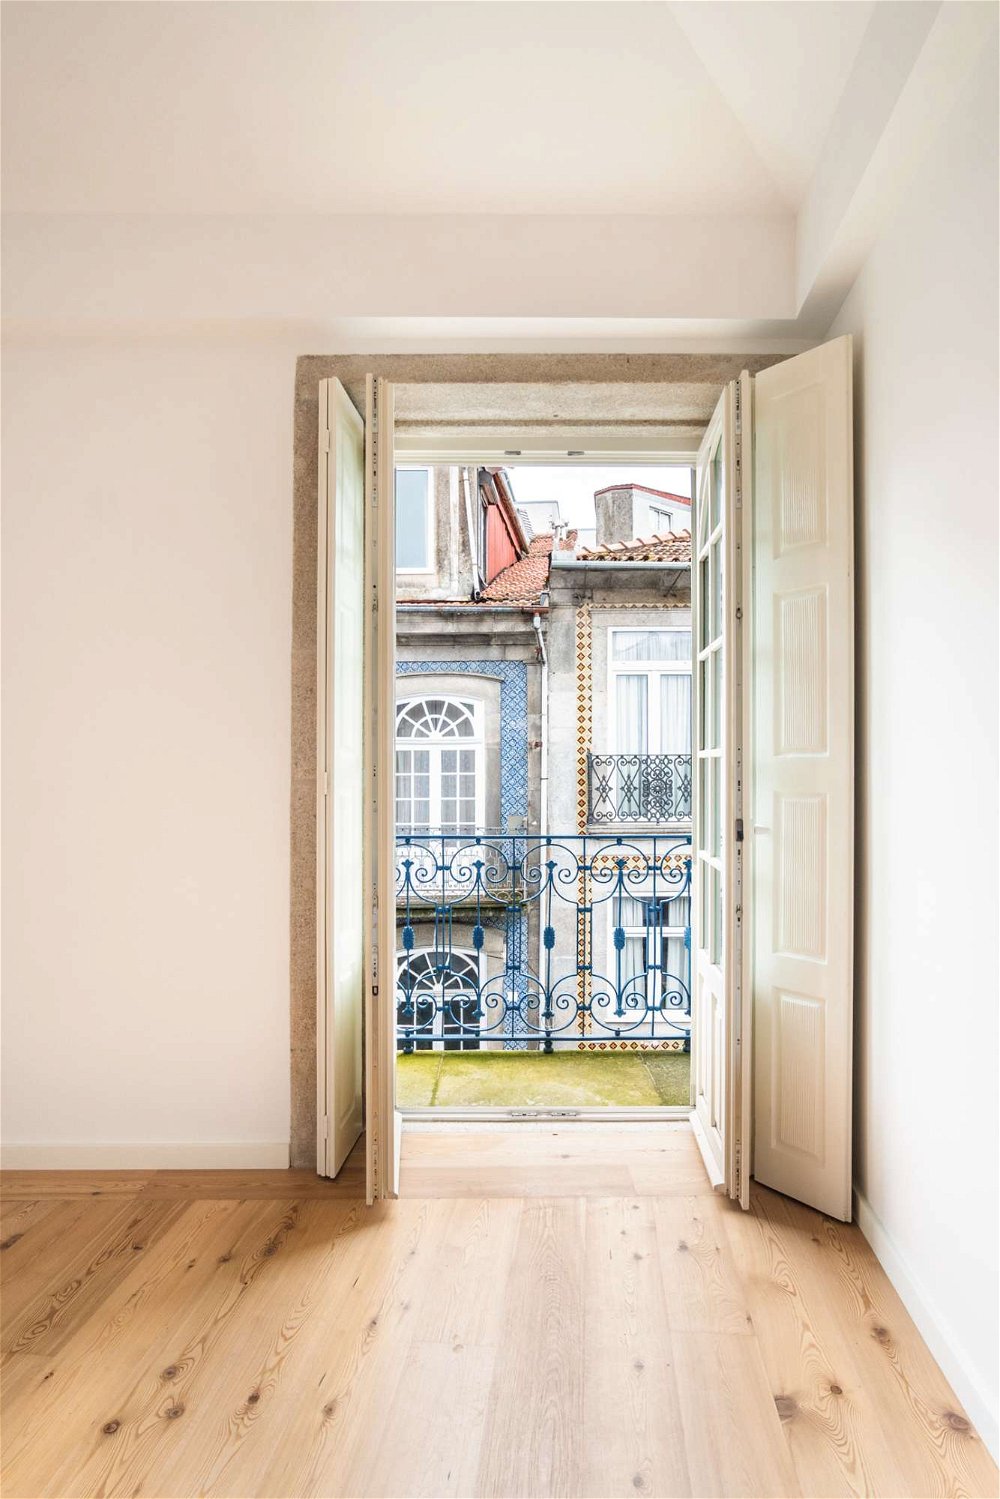 1-bedroom duplex apartment with balcony in the downtown Baixa area 1531692927